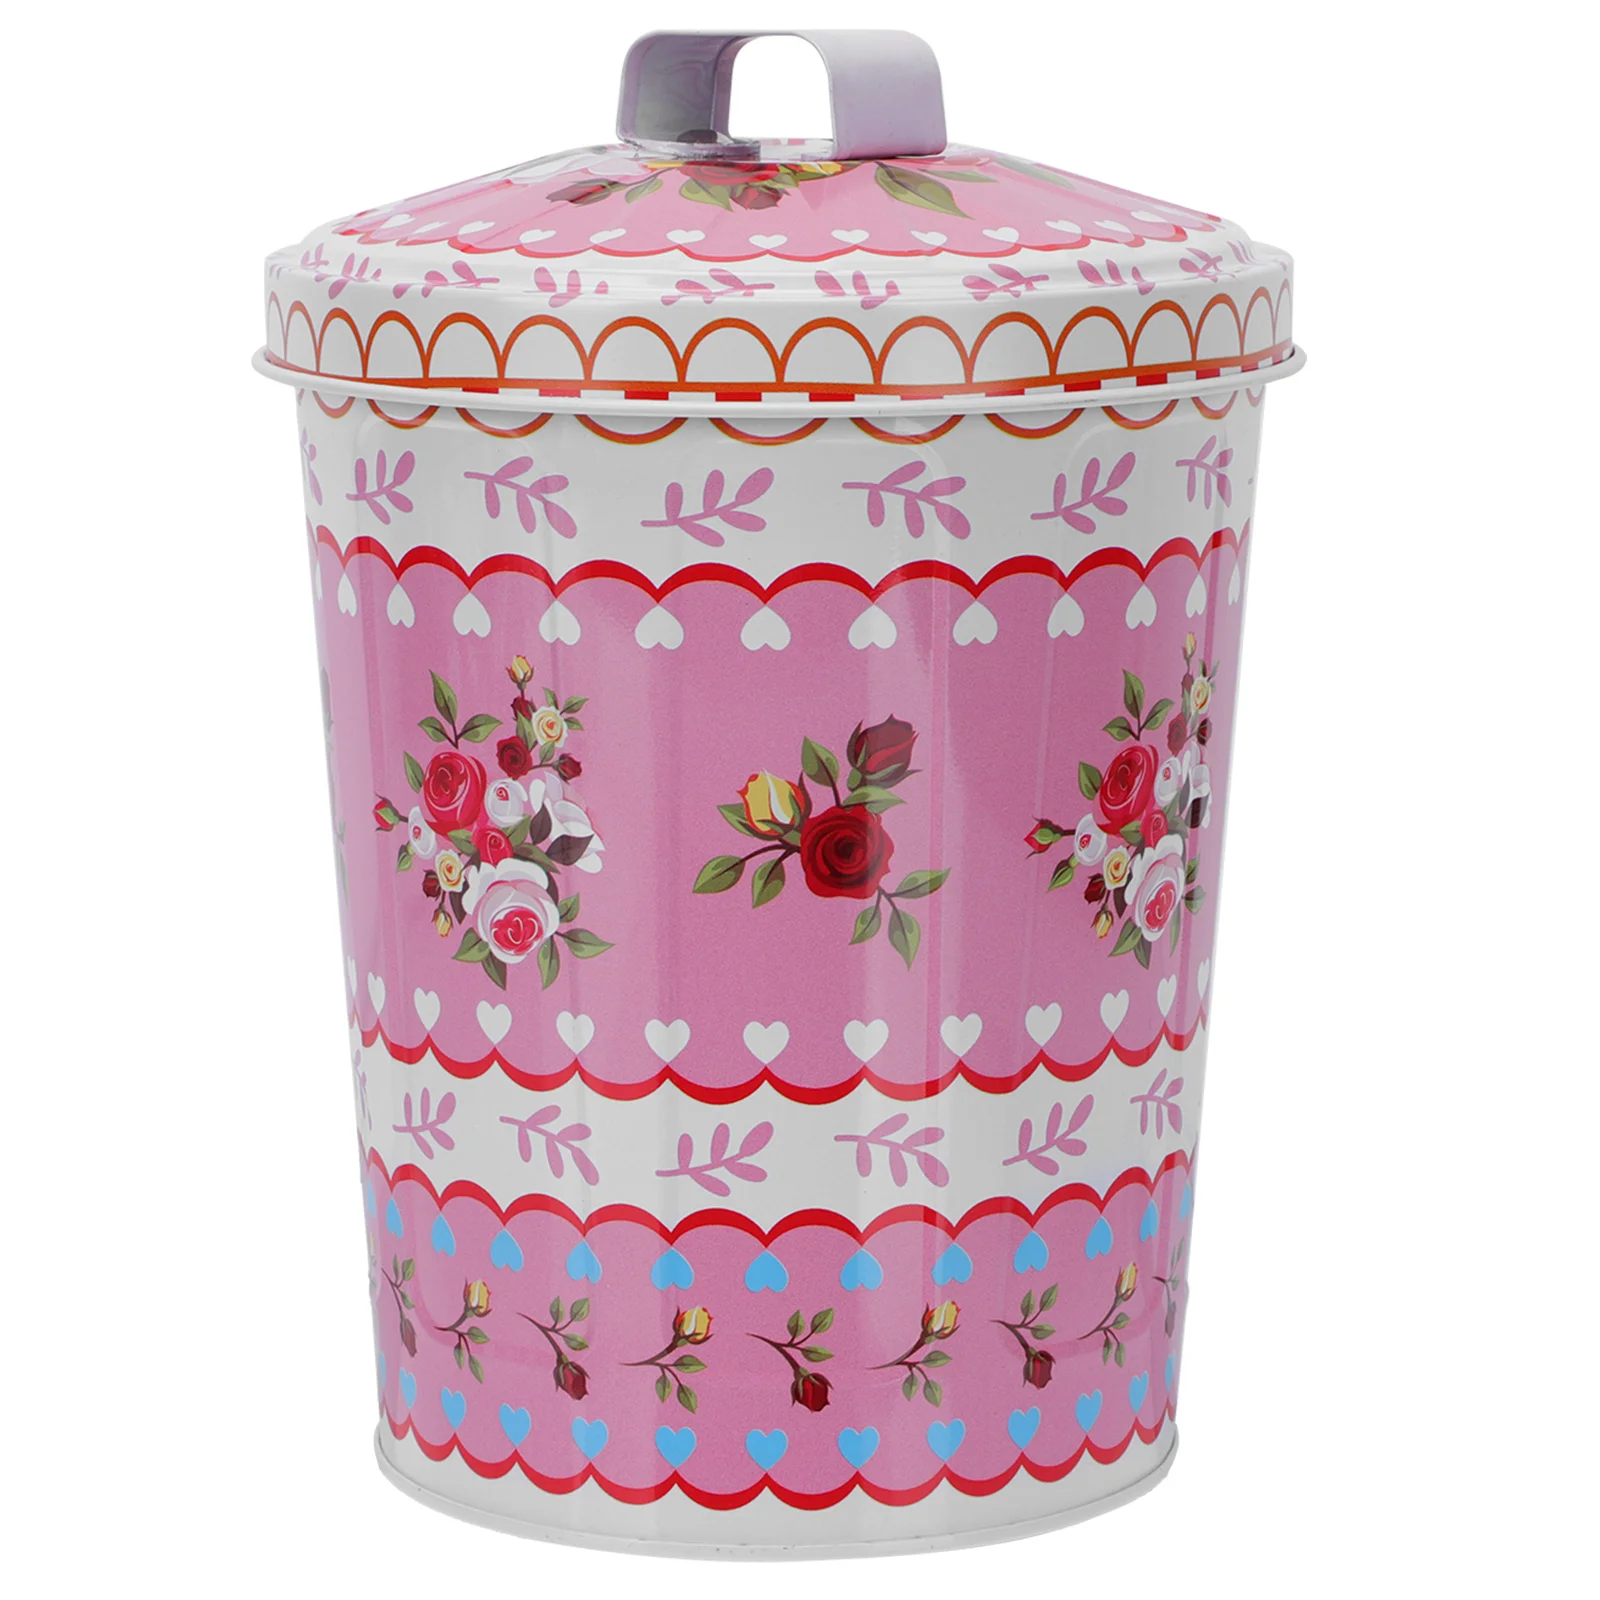 

Kitchen Bread Bin Candy Containers Gifts Biscuit Tin Cookie Jar Baked Food Storage Dog Farmhouse Jars Treat Holder Canister